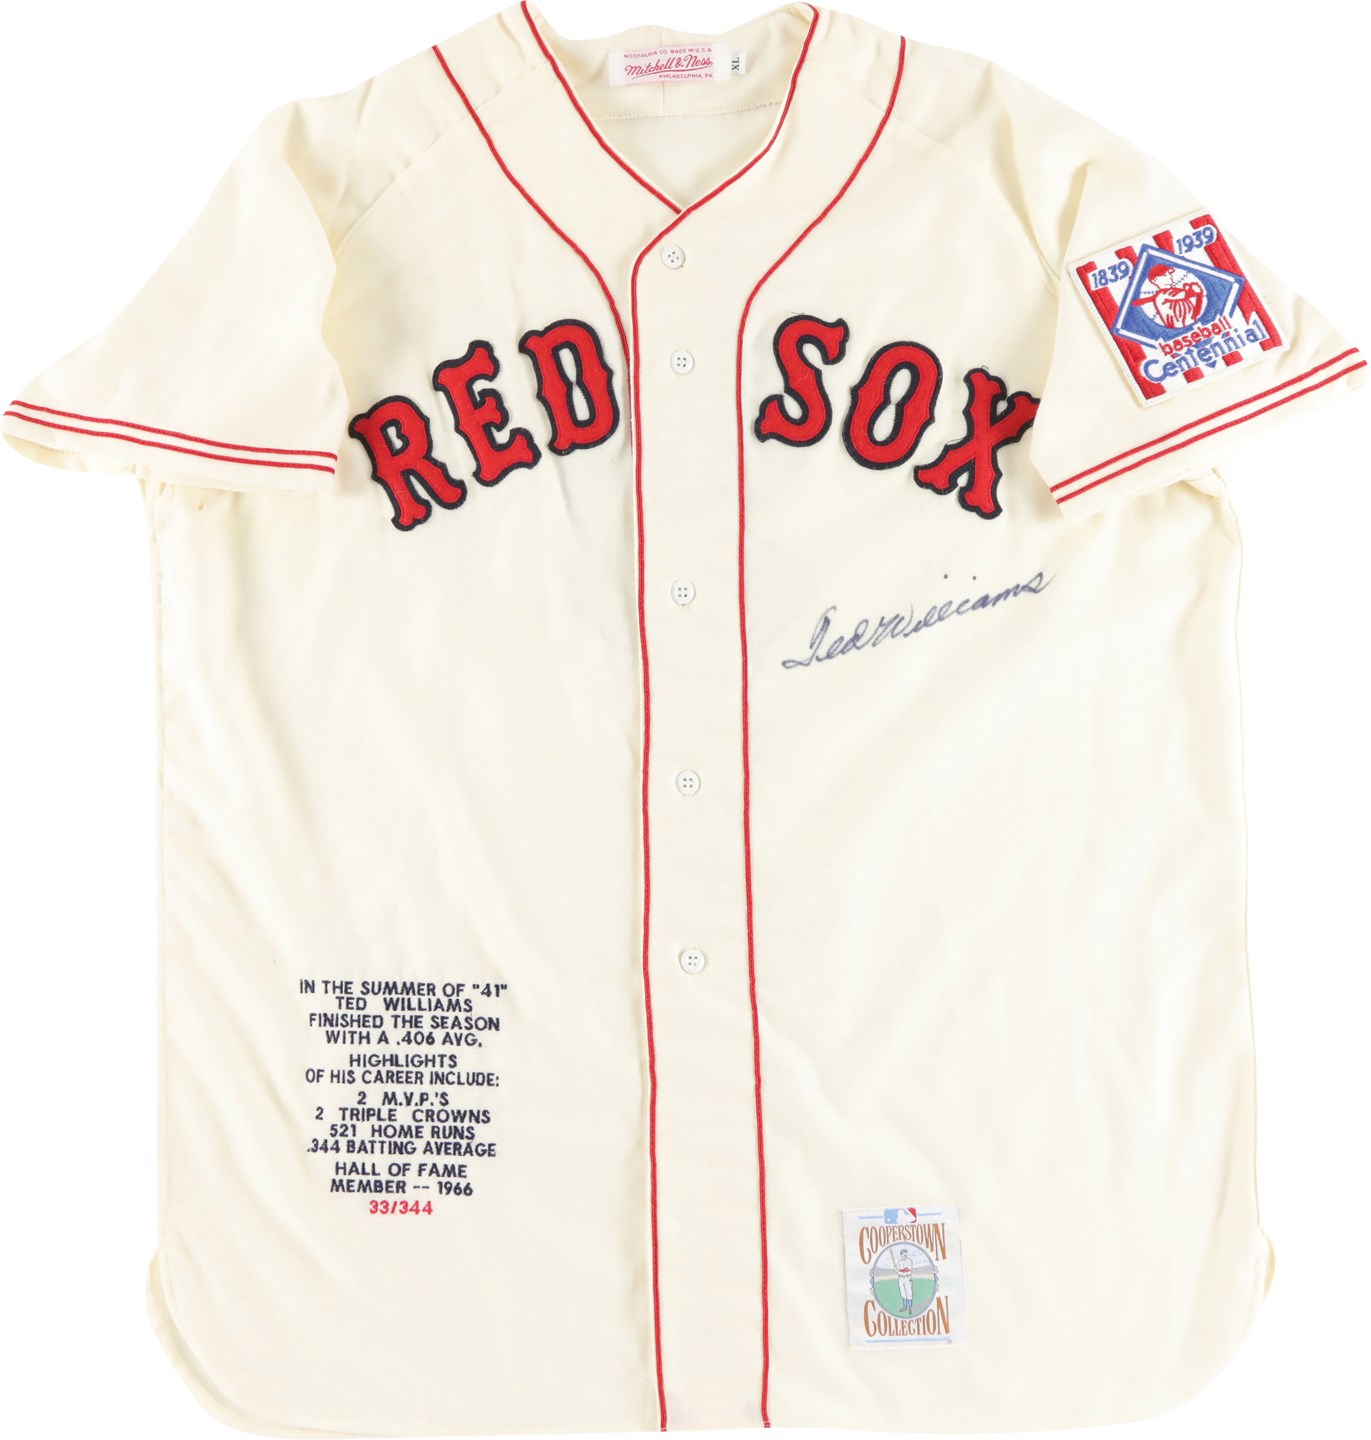 - Ted Williams Signed Limited Edition 1939 Boston Red Sox Jersey 33/344 (Green Diamond COA & Proof of Signing)